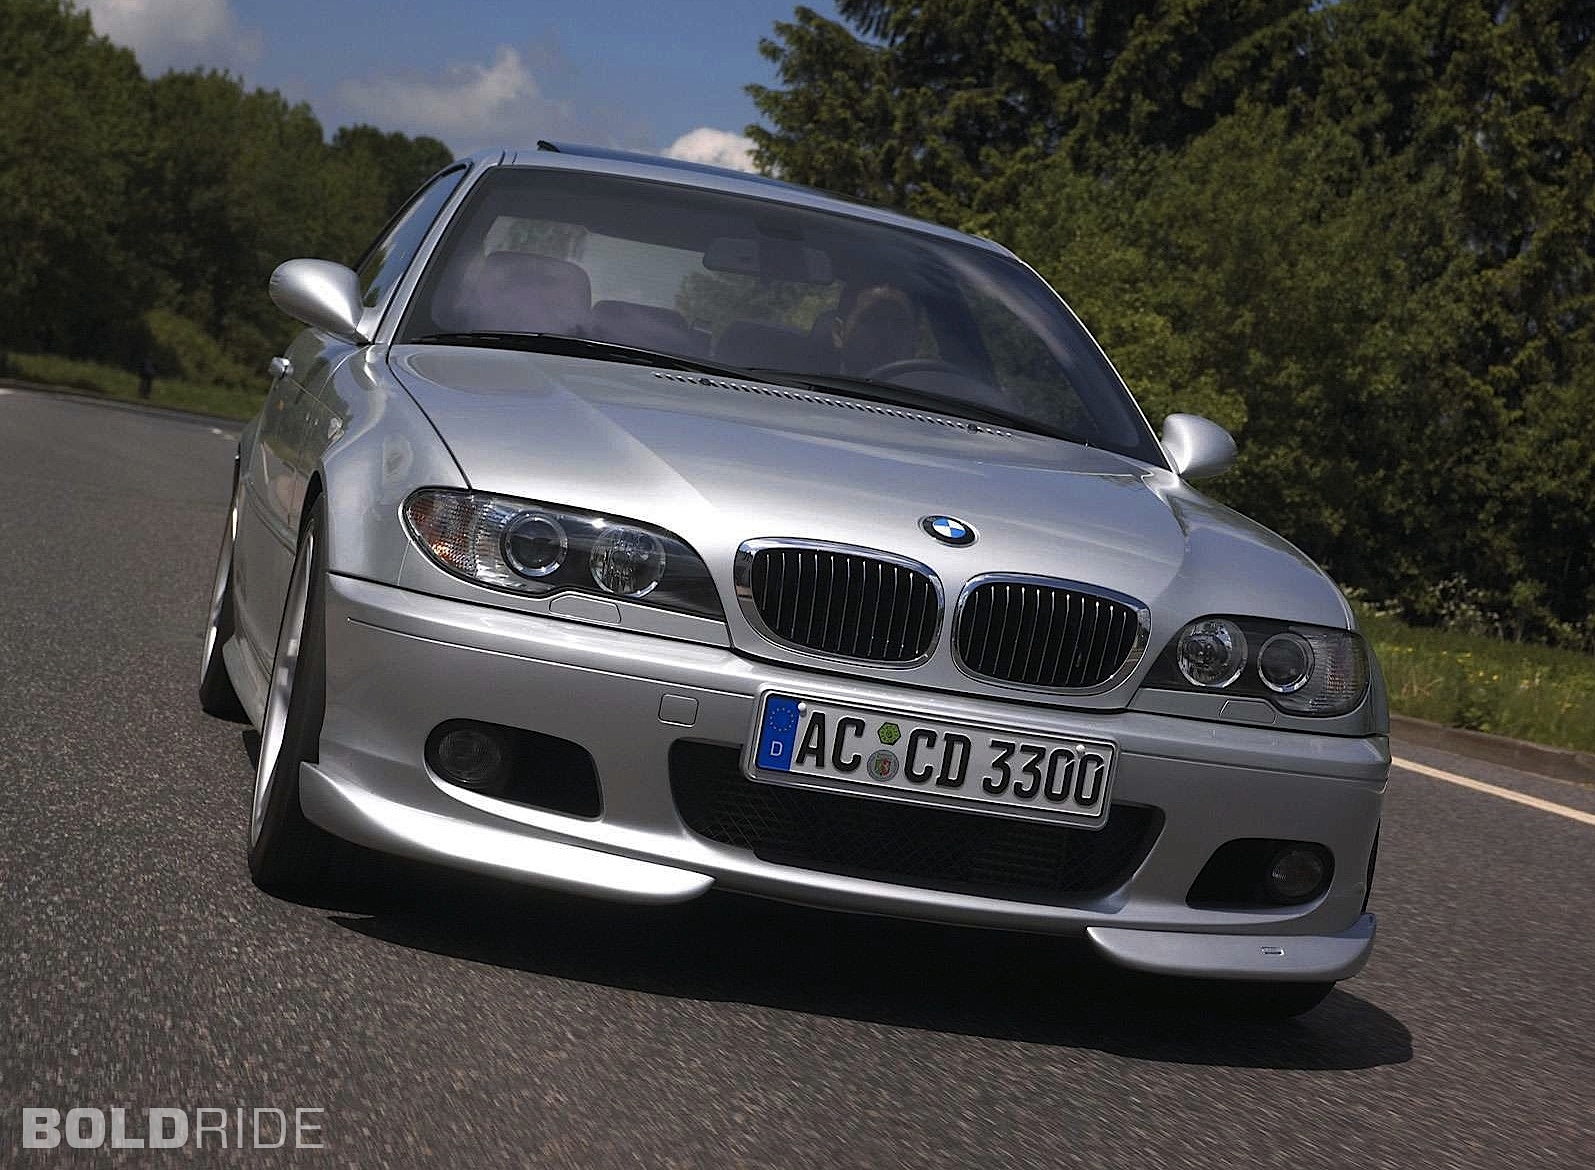 Bmw E46 Ac Schnitzer Wallpapers